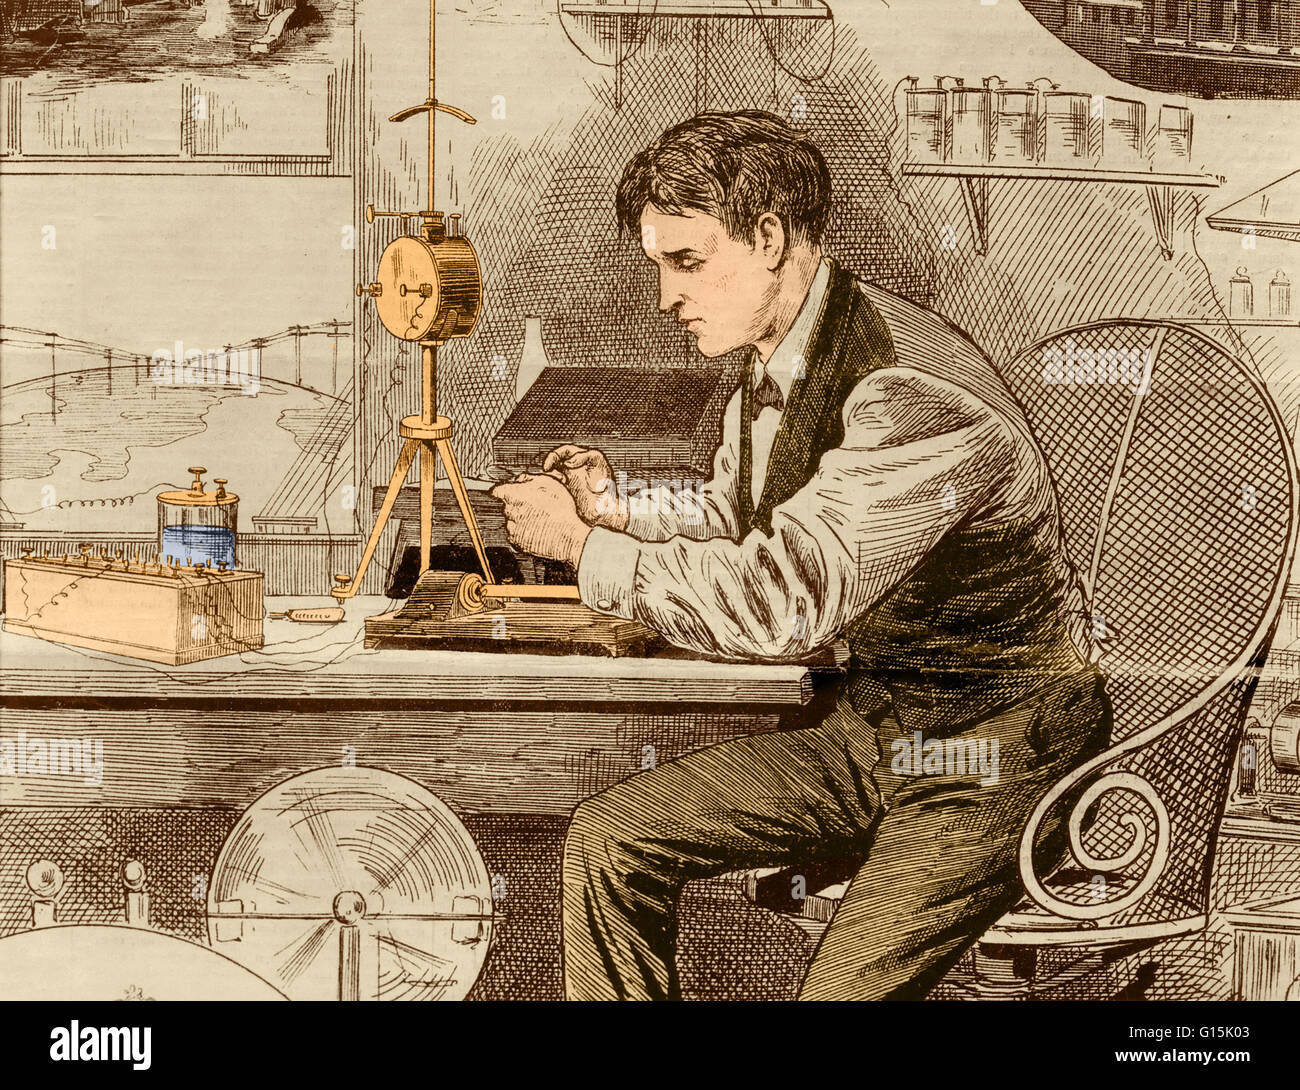 Thomas Edison operating a telegraph machine. Thomas Alva Edison (1847-1931) was an American inventor and businessman. He developed many devices that greatly influenced life around the world, including the phonograph, the motion picture camera, and a long- Stock Photo